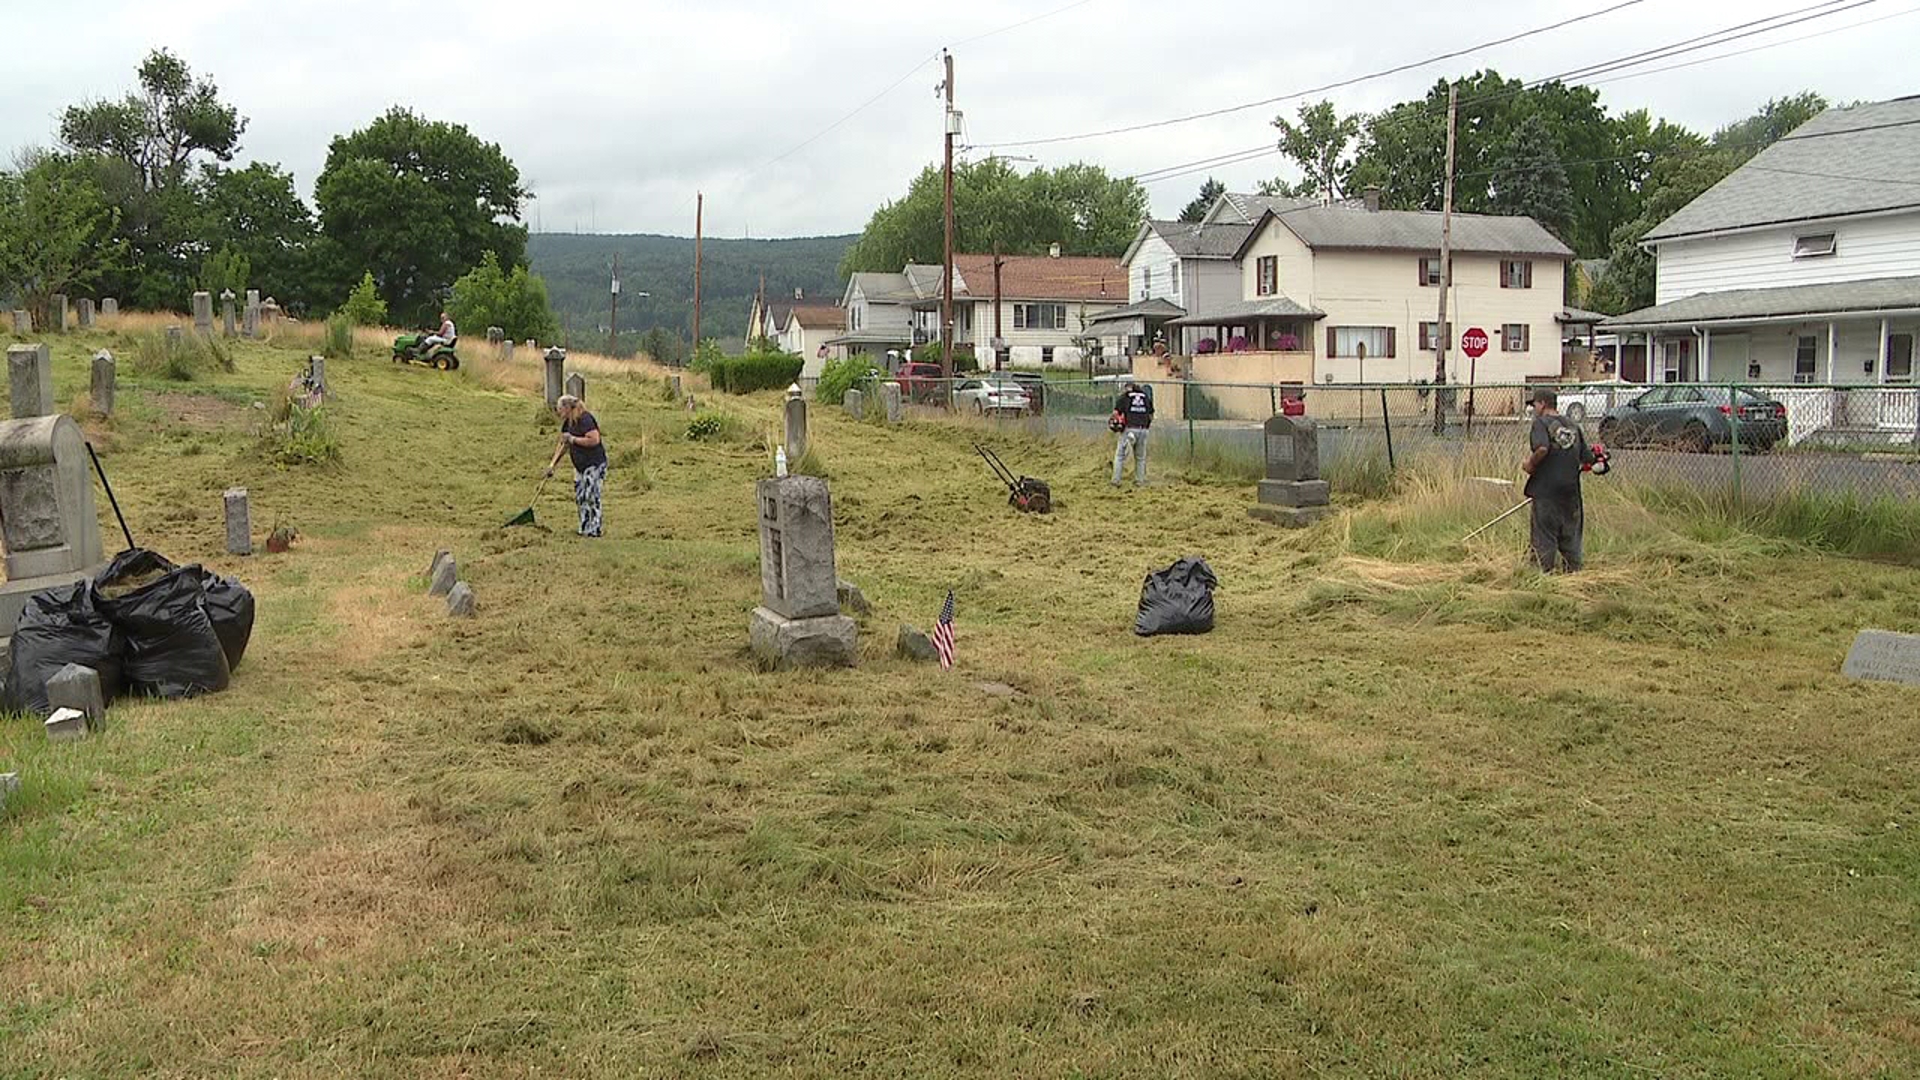 Weeds and grass have taken over a cemetery in Scranton, but a local non-profit, along with some volunteers, hopes to change that.